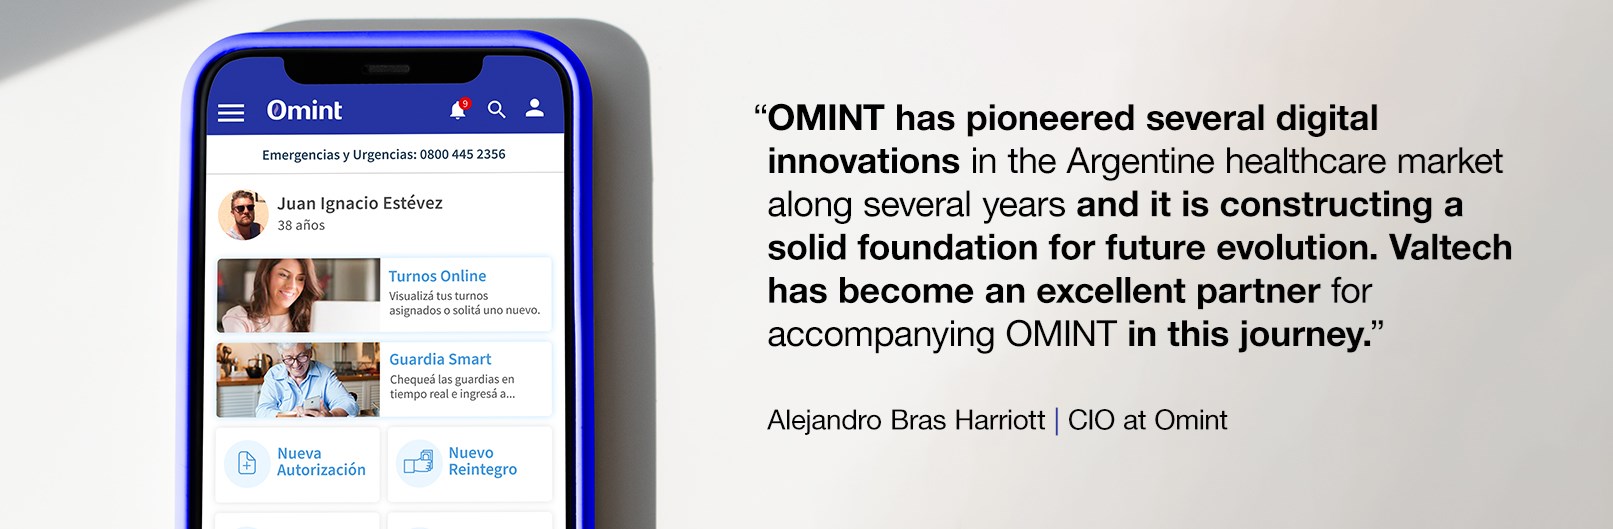 Omint-Case-Study-Quote-NEW.jpg